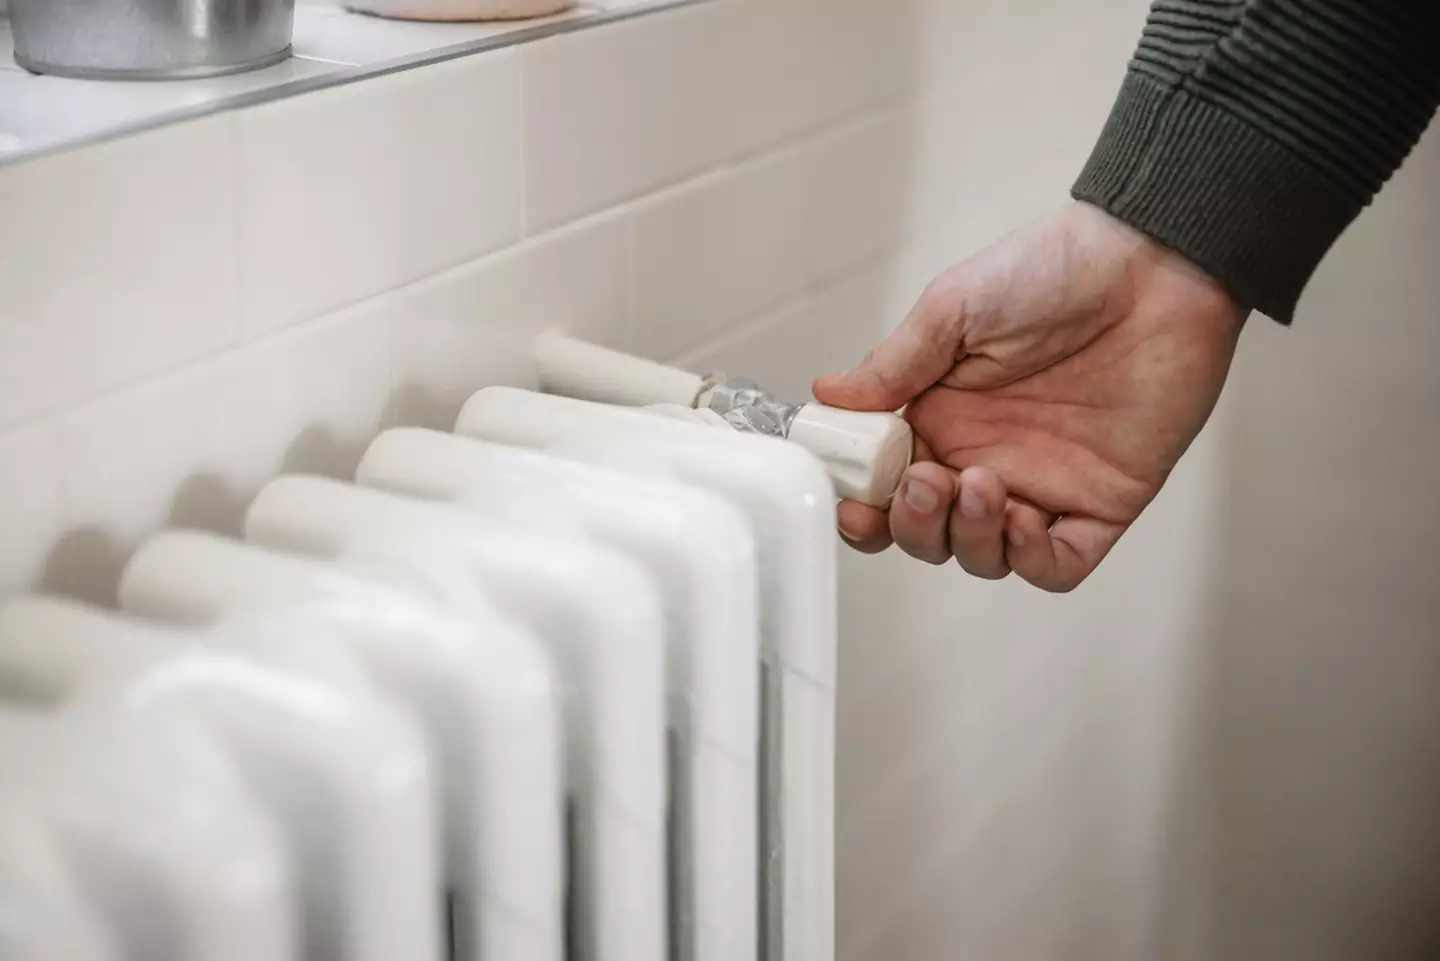 Using the thermostatic radiator valves (TRVs) correctly could save you cash.